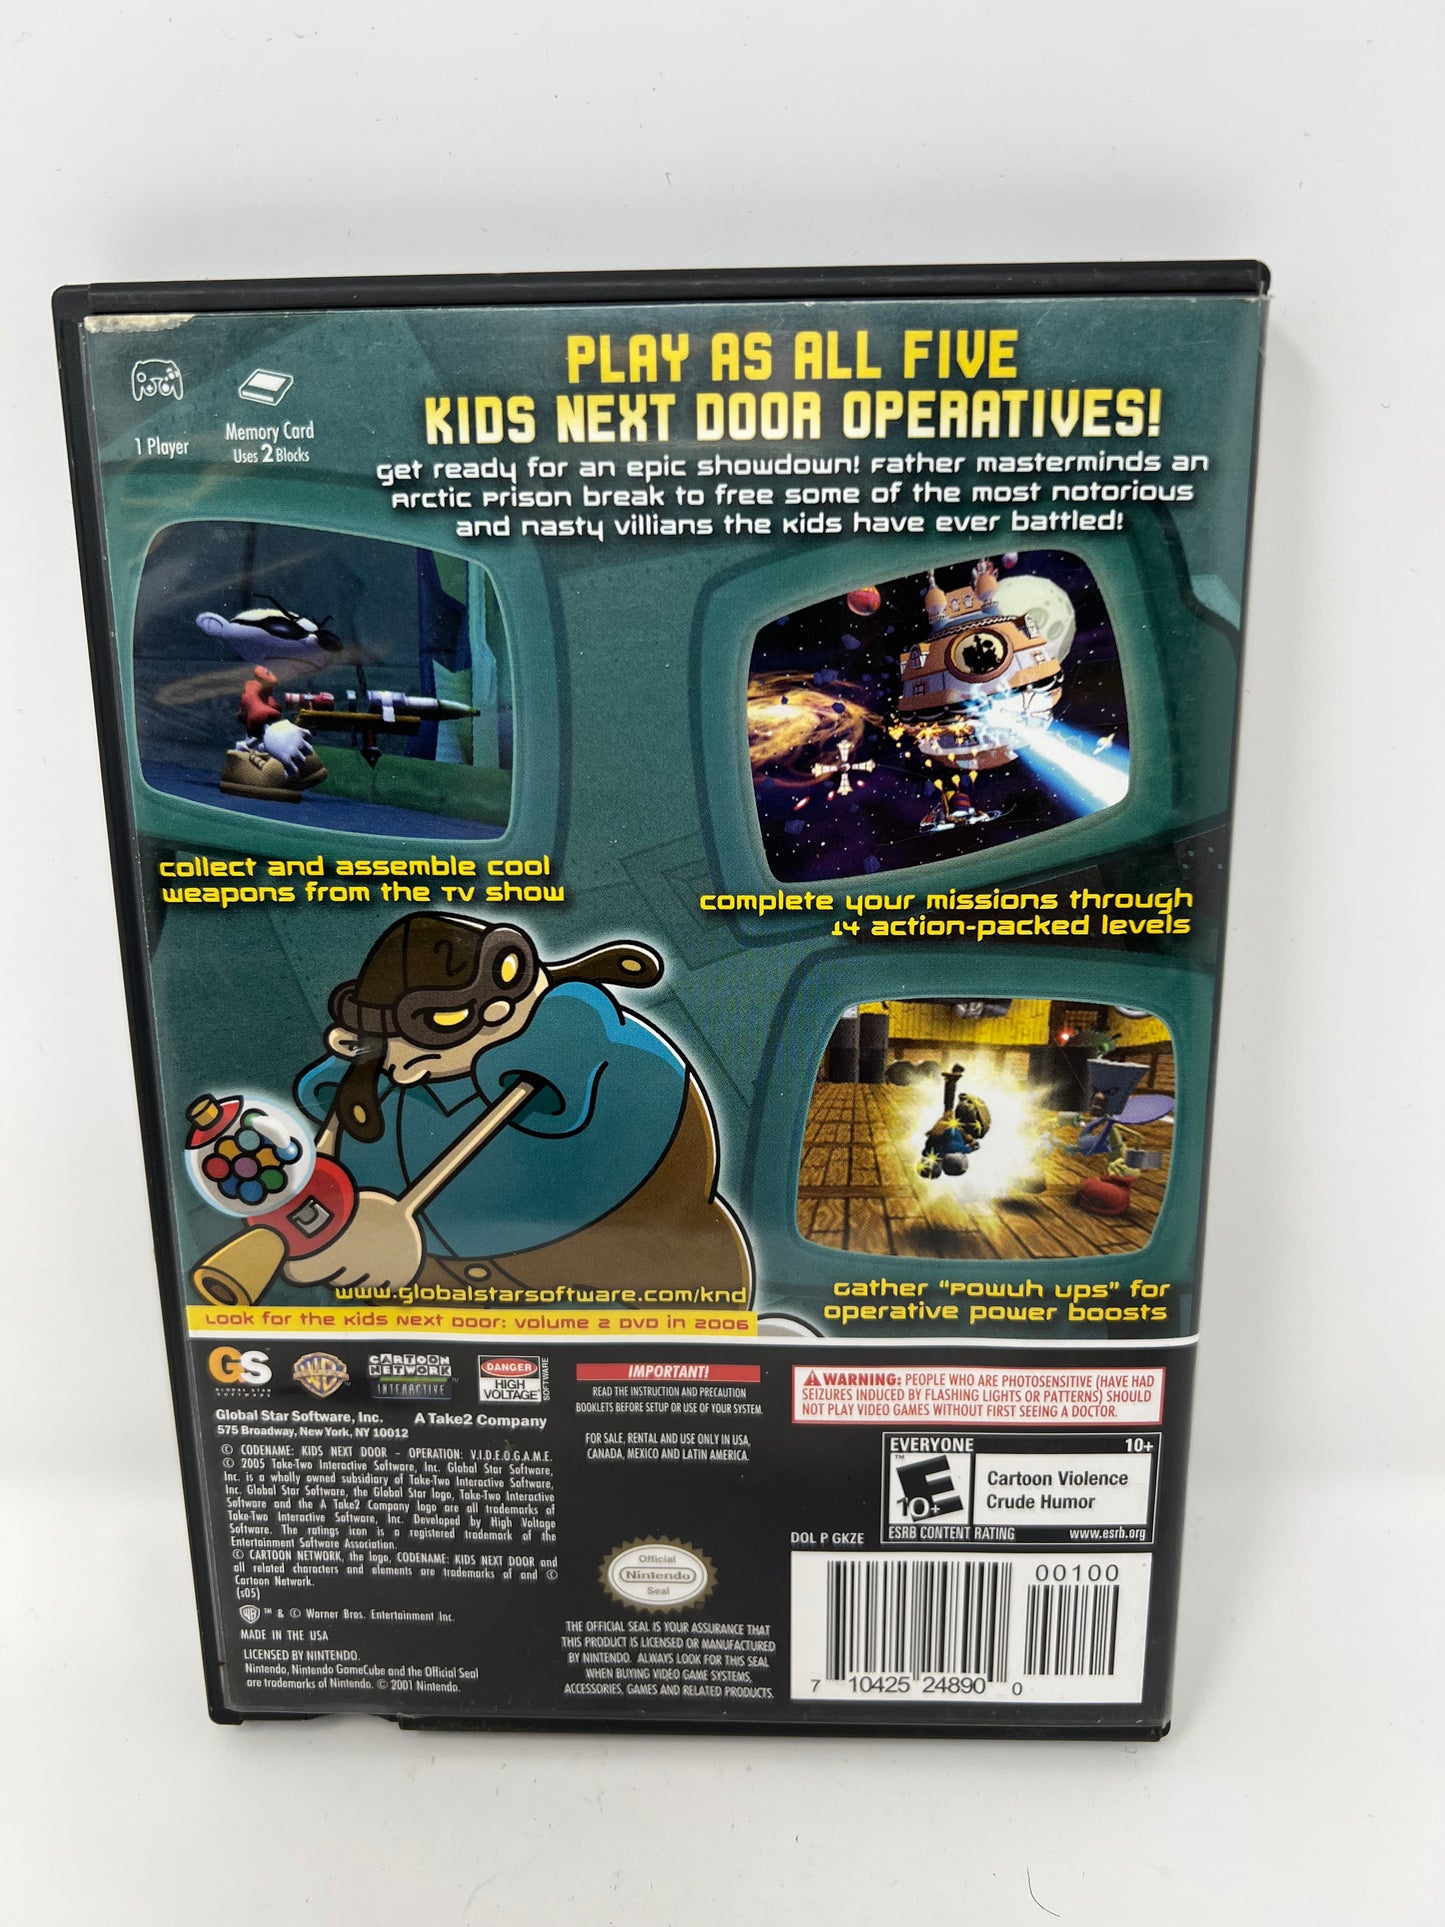 KND Codename Kids Next Door Operation - Gamecube - Used